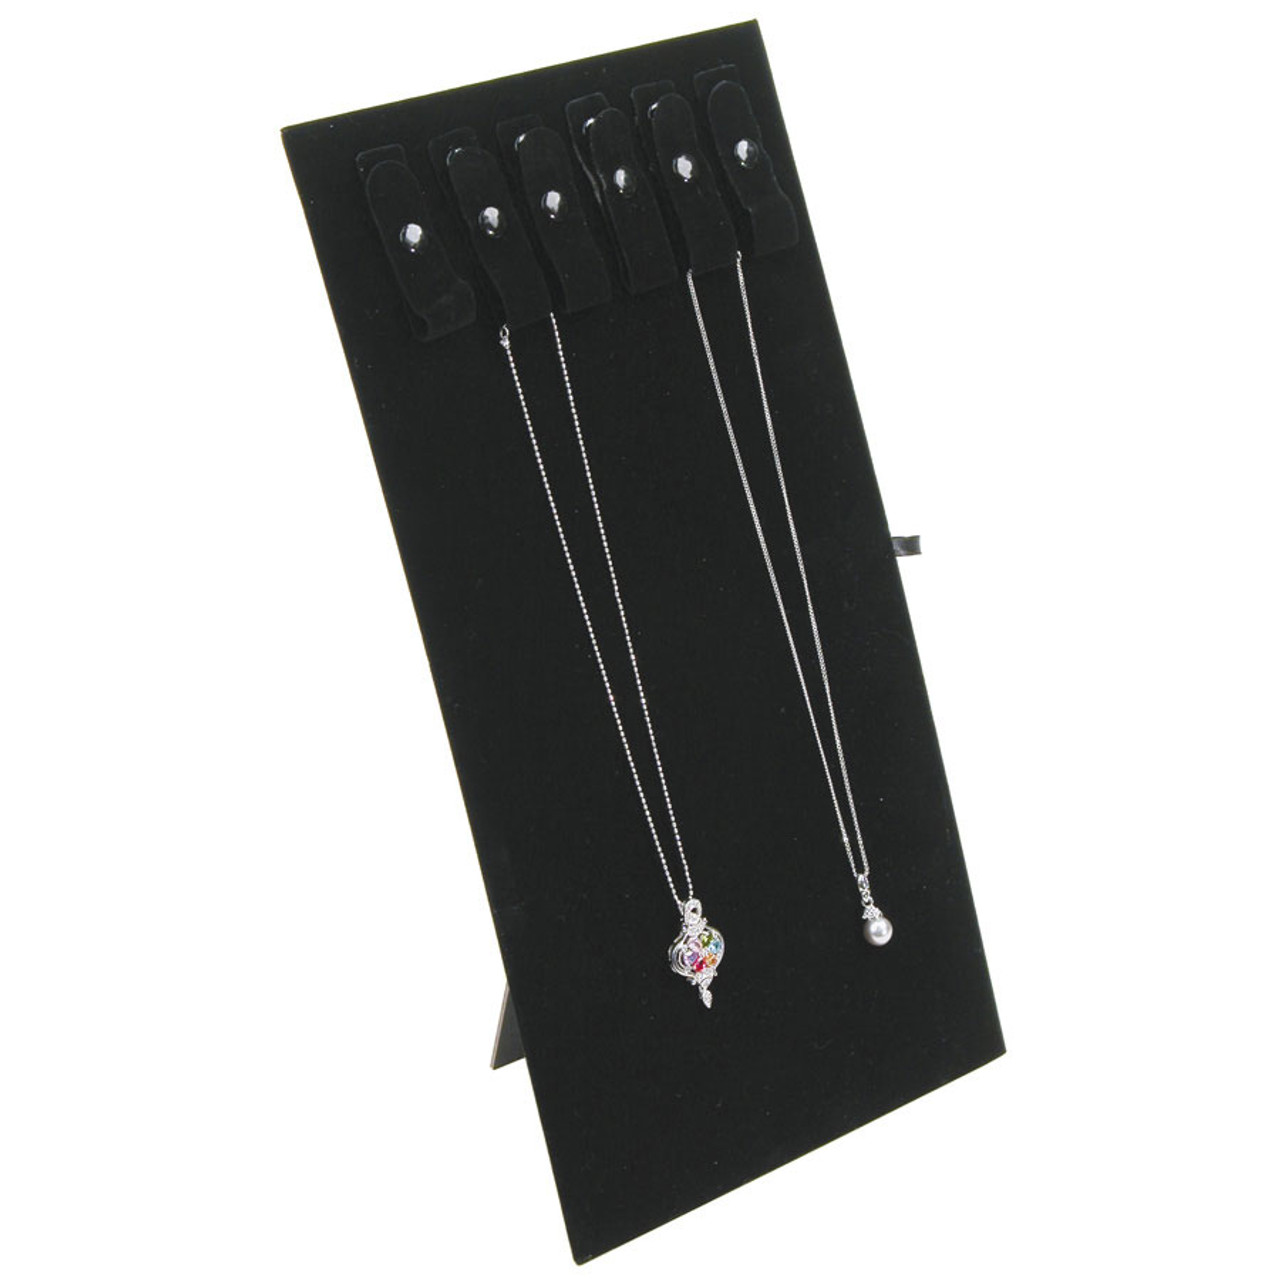 Jewellers Large Velvet/Leatherette Necklace/Chain Display Pad with 15 Hooks 